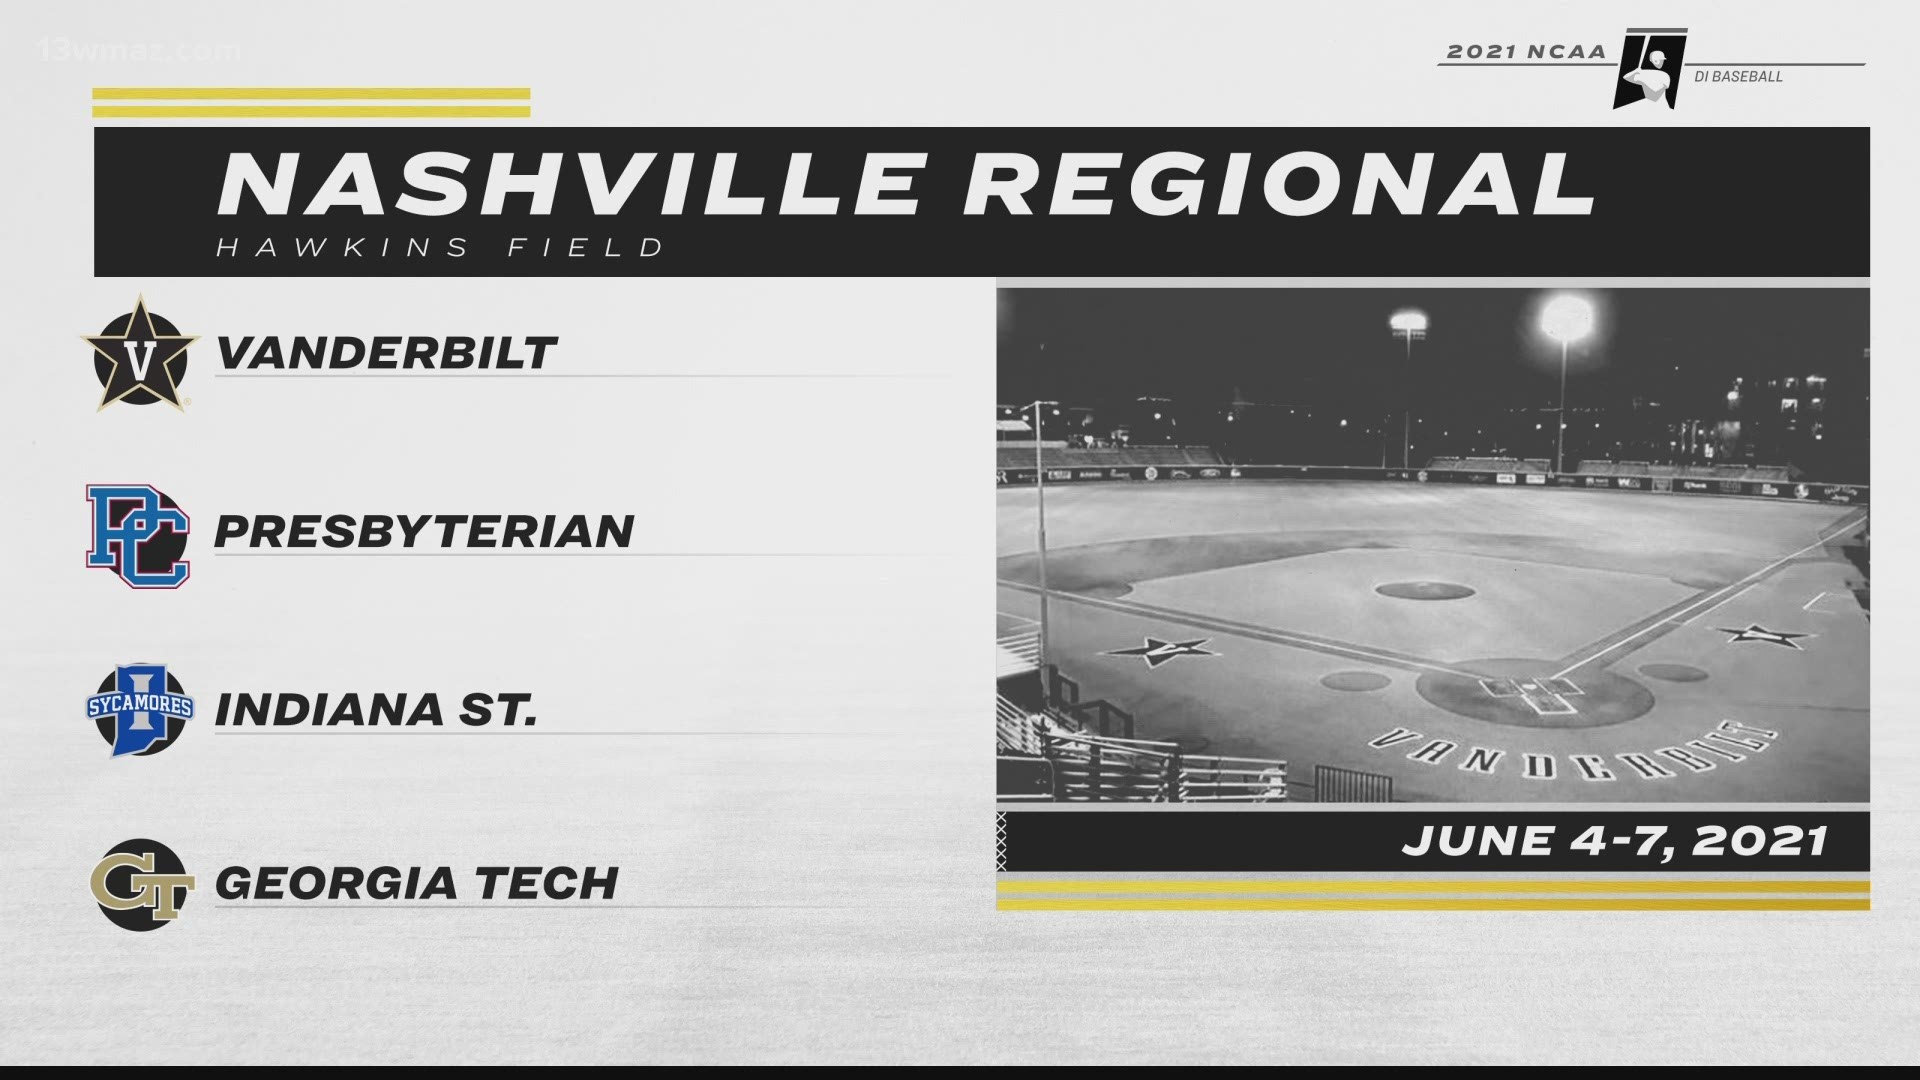 Georgia Tech will be the 2-seed in the Nashville Regional